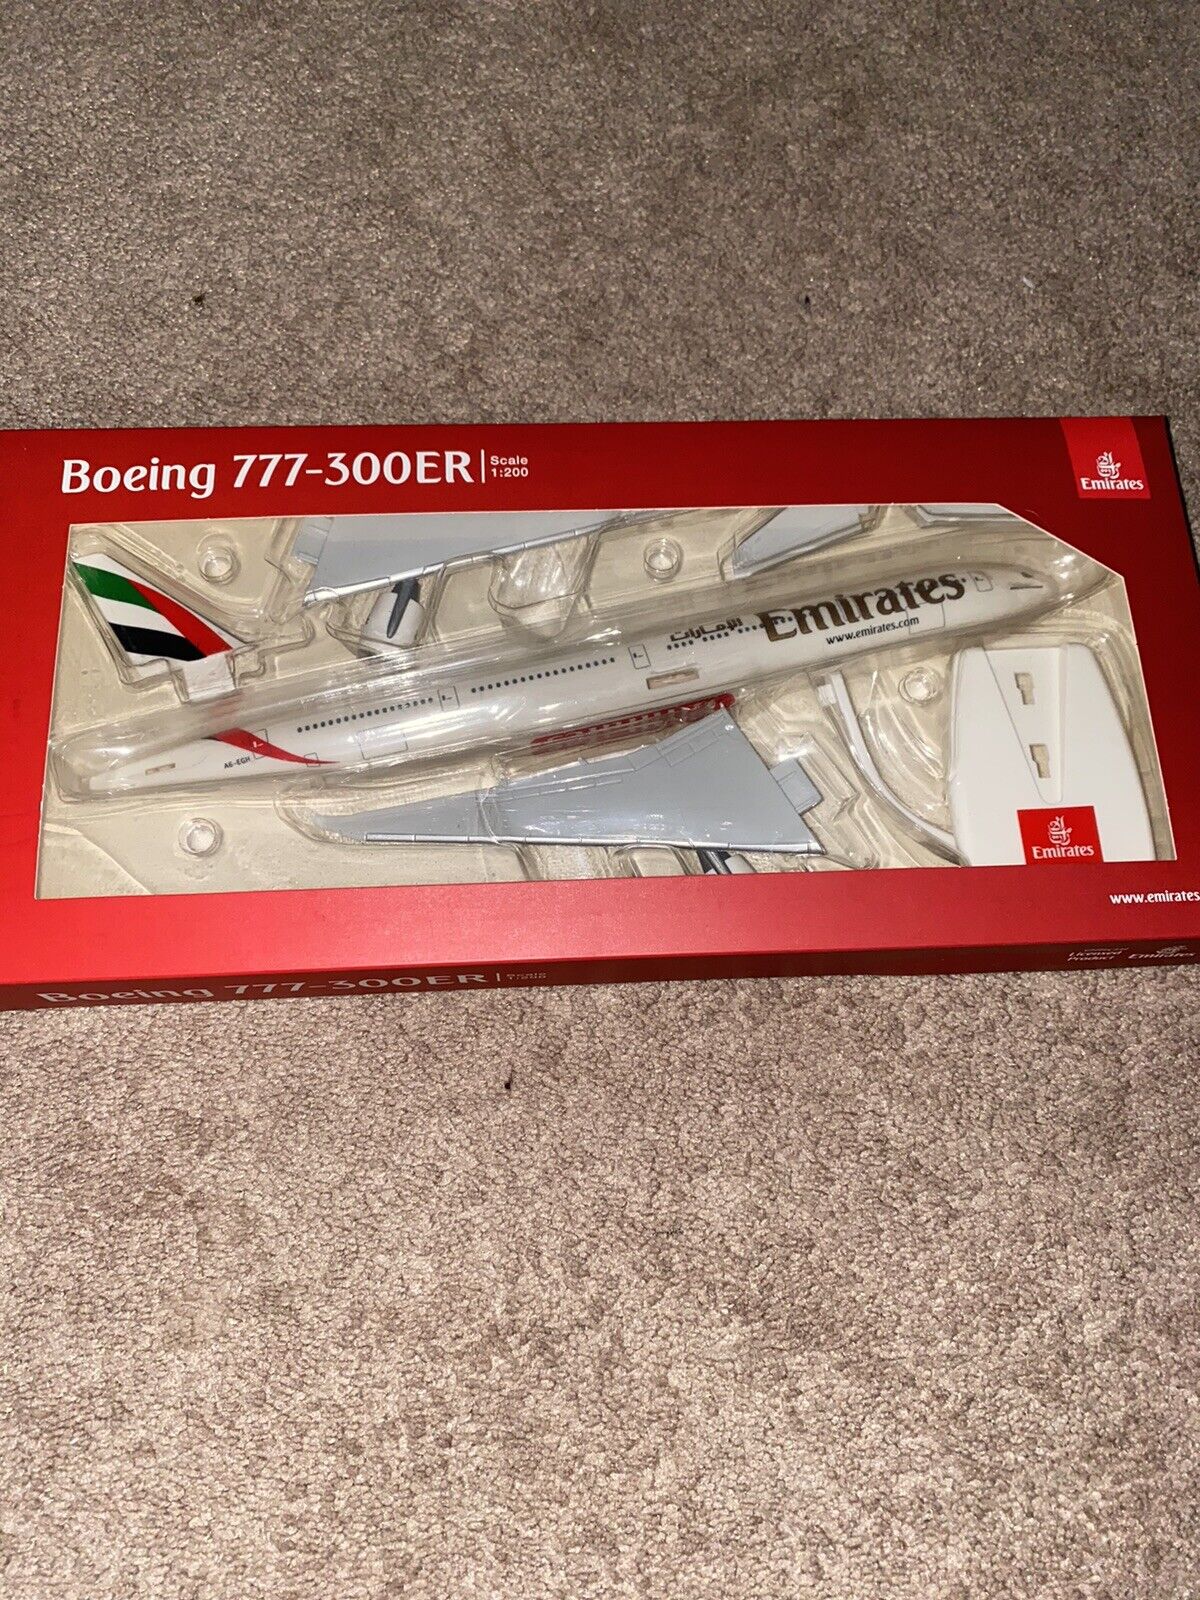 Model Aircraft Boeing 777-300 ER Emirates Scale 1:200 35(Cm)